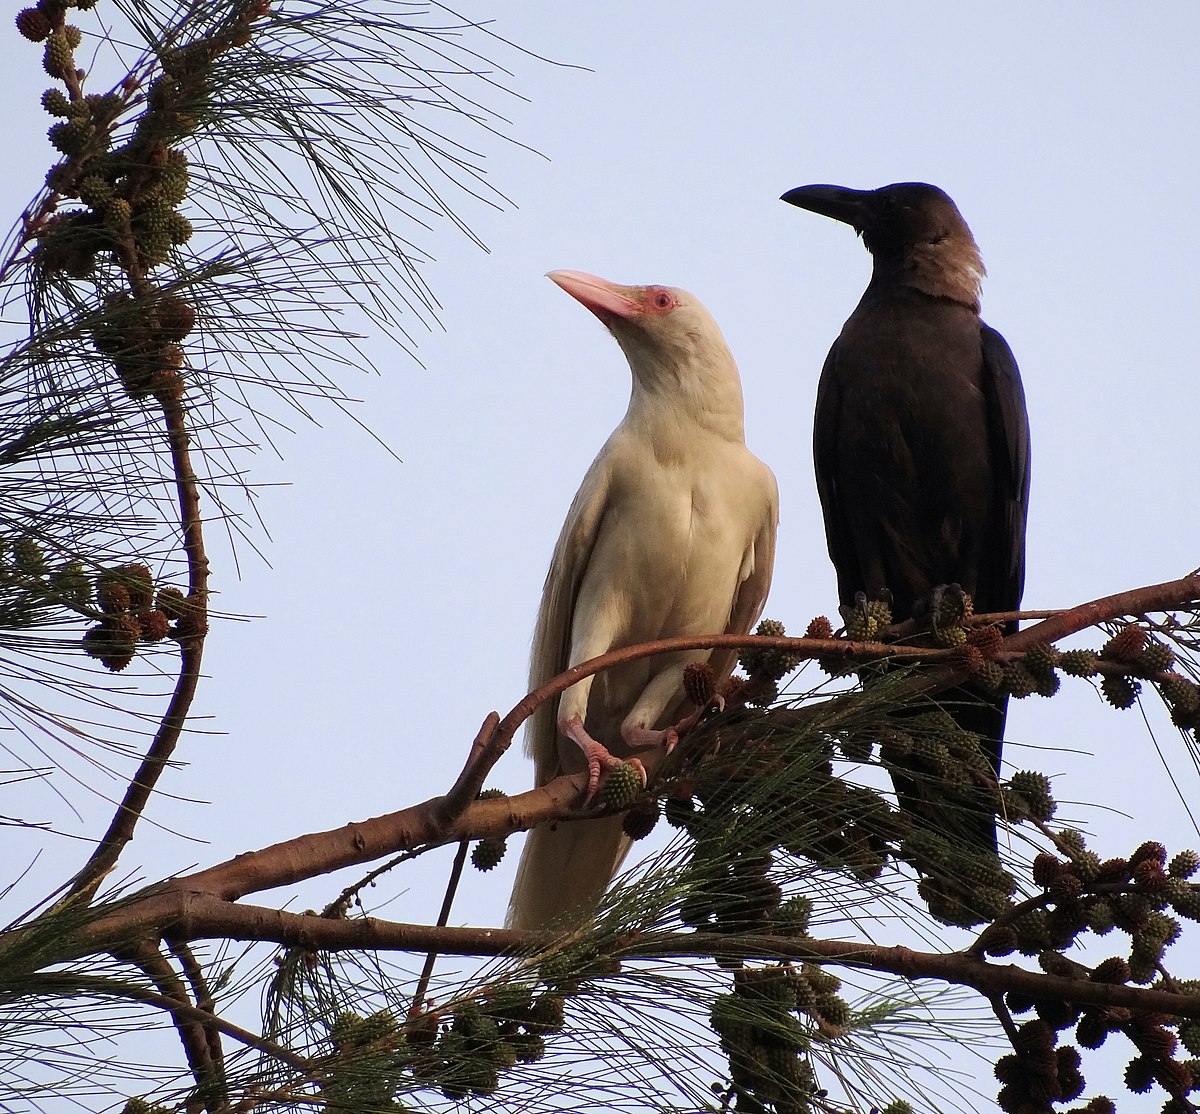 File:Albino crow and its mother.JPG - Wikimedia Commons